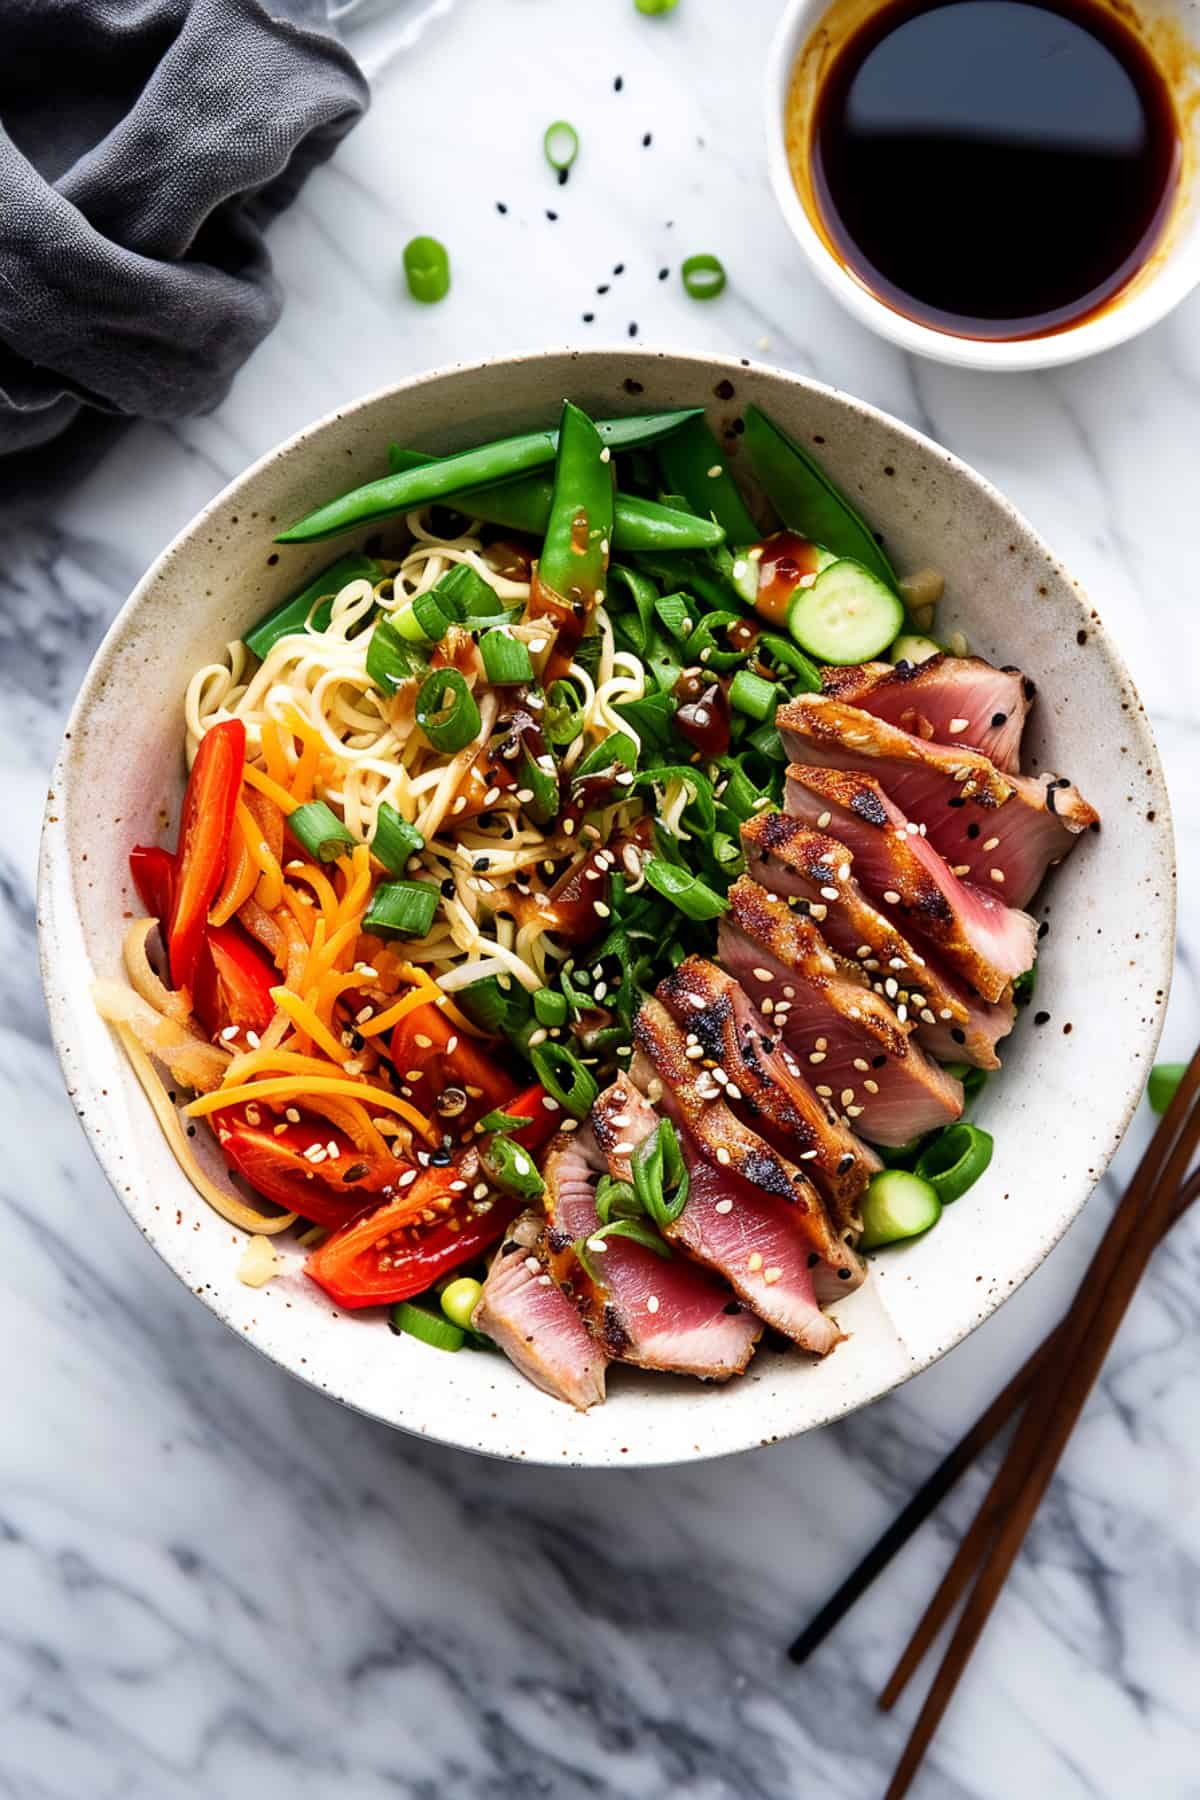 Seared Asian tuna noodle bowls with soy sauce.